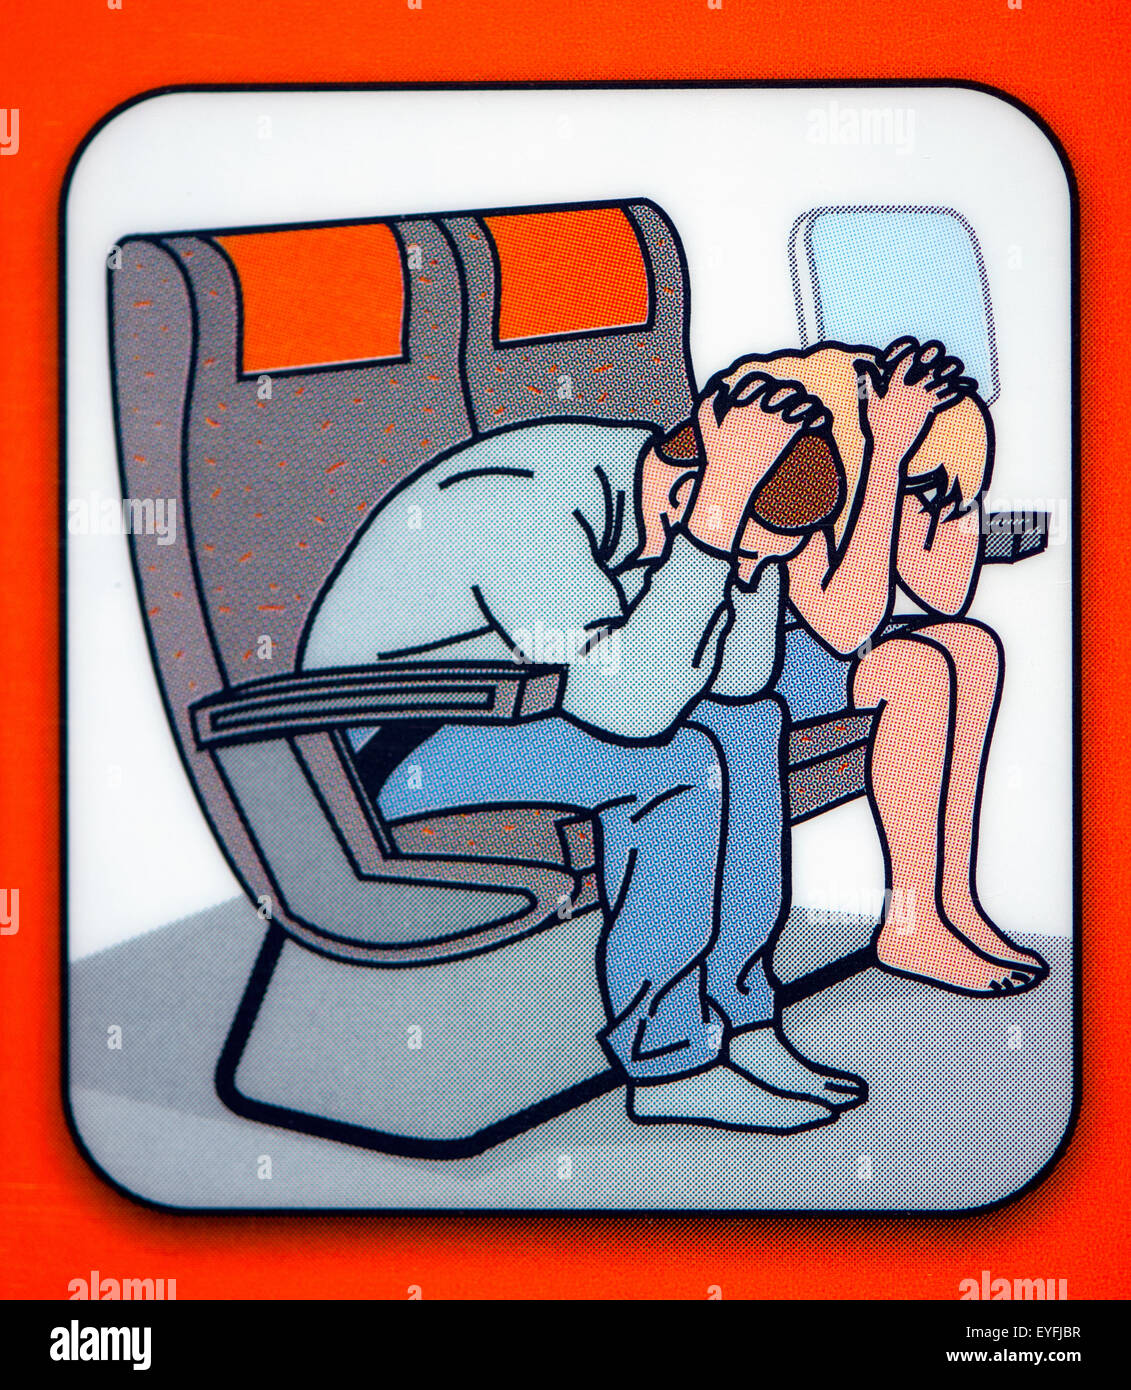 Close-up of the brace position from an Easyjet passenger safety card. Stock Photo